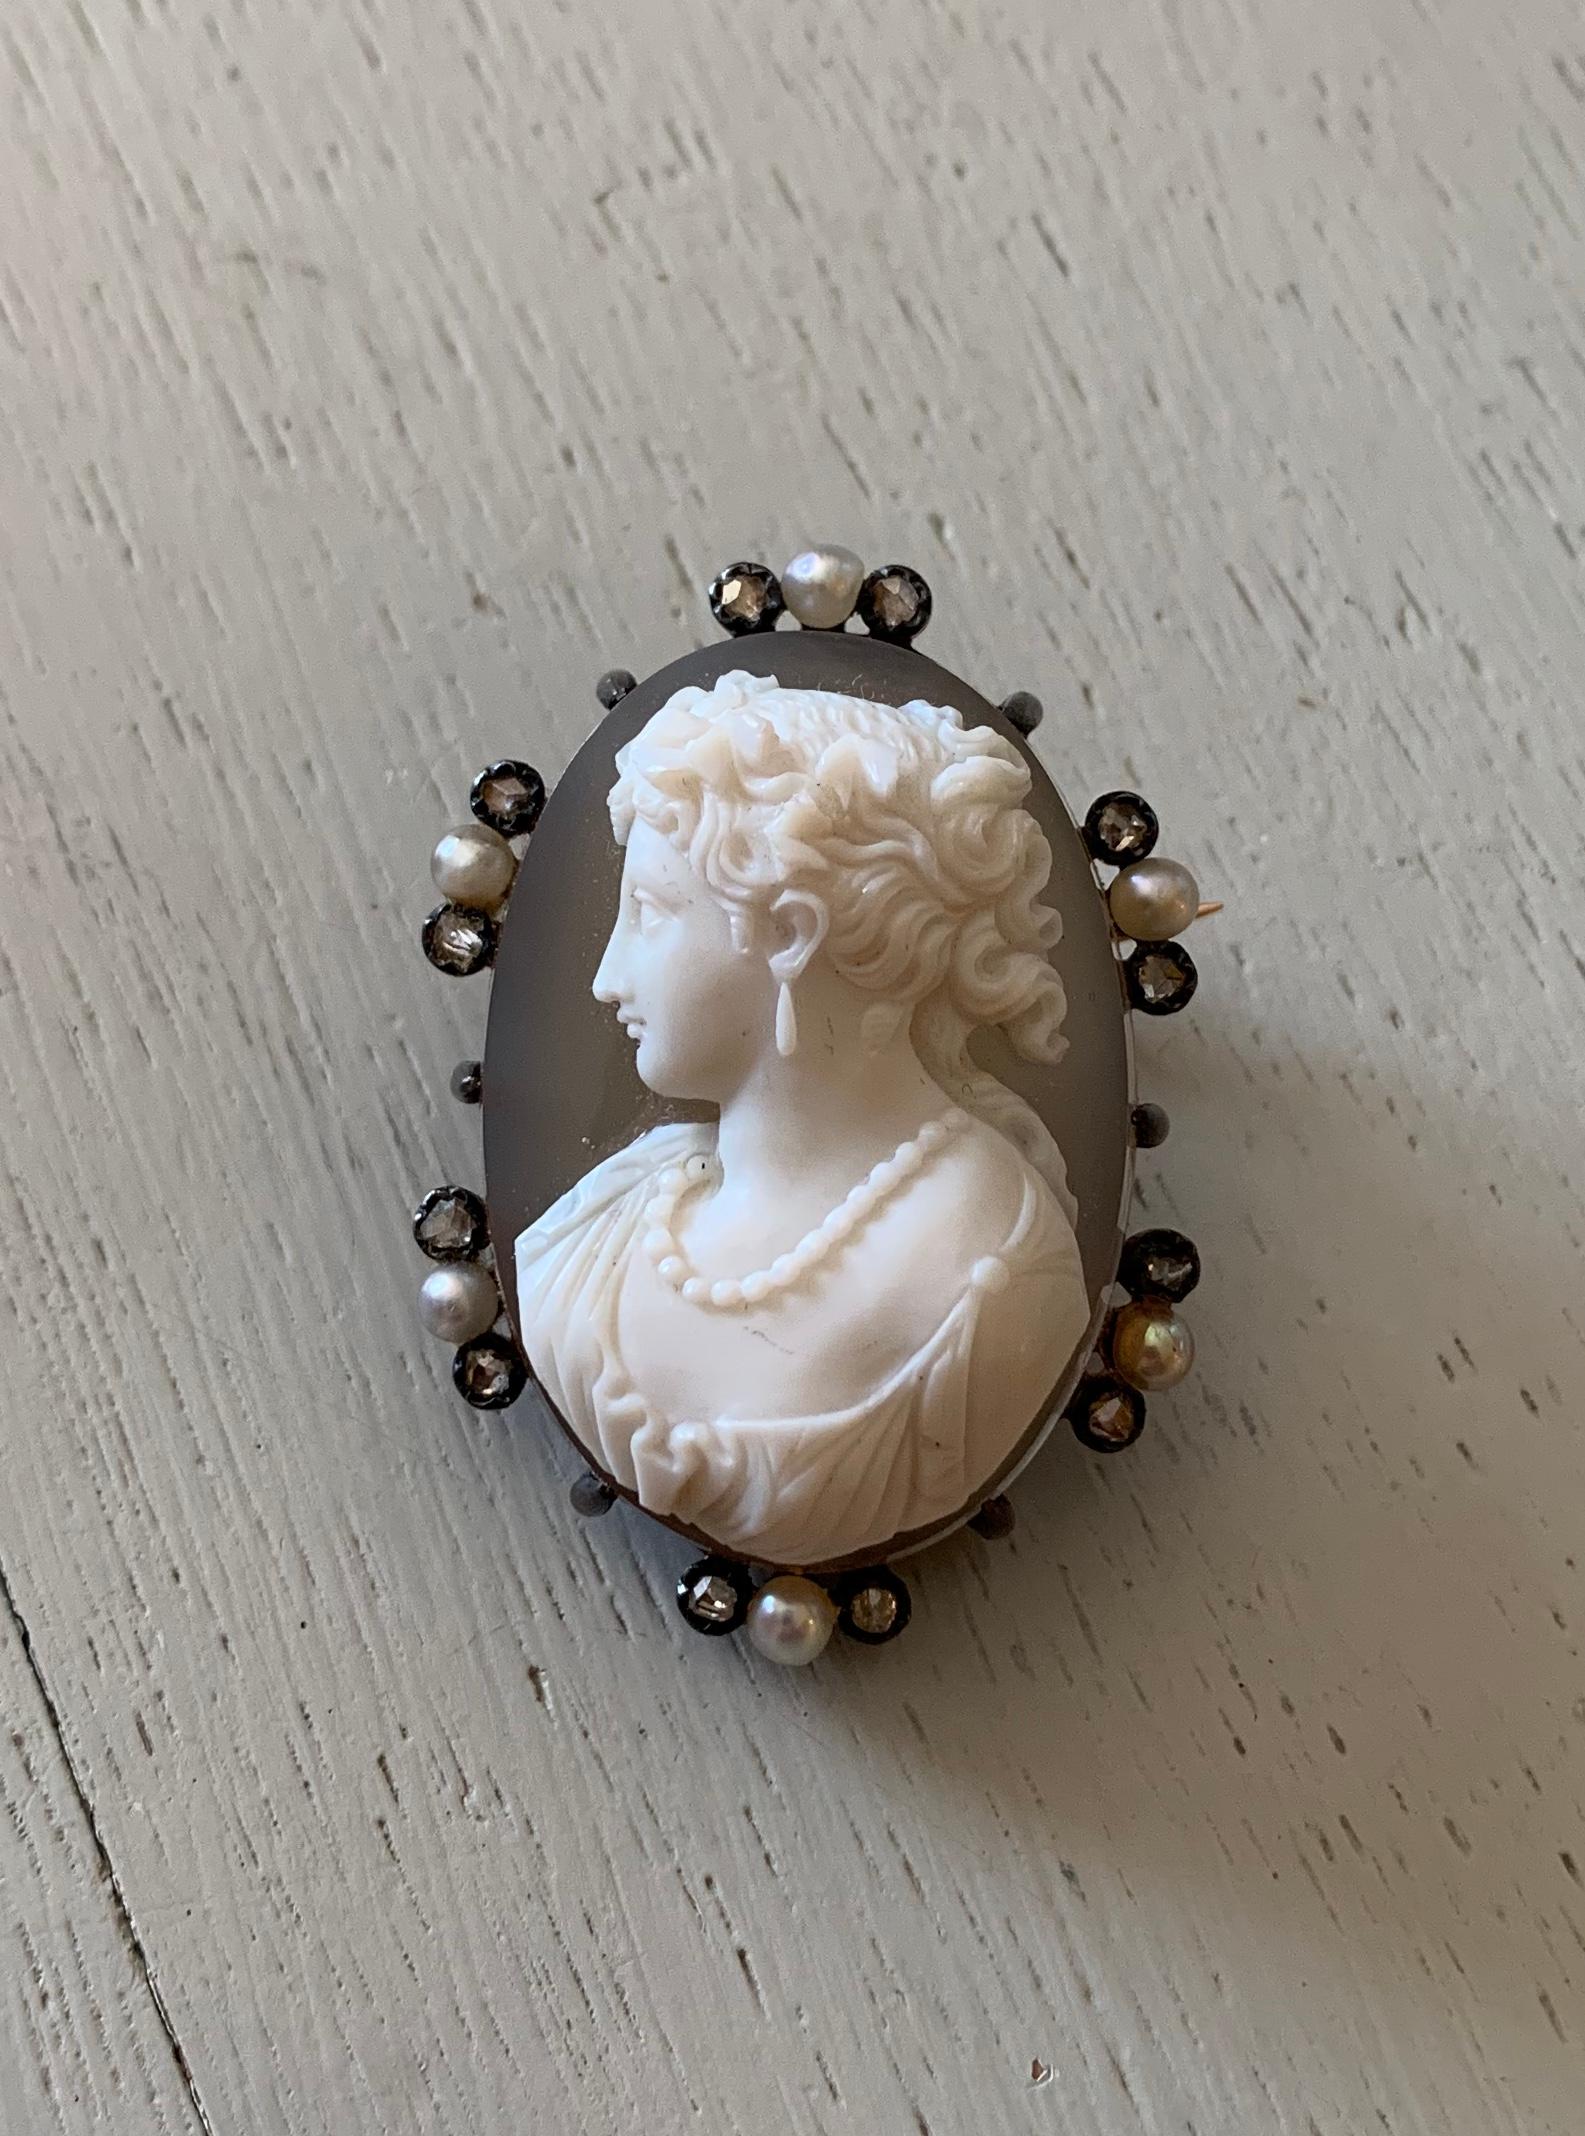 Rose Cut Diamond Cameo Pendant Brooch French 18 Karat Gold Victorian Hardstone In Excellent Condition For Sale In New York, NY